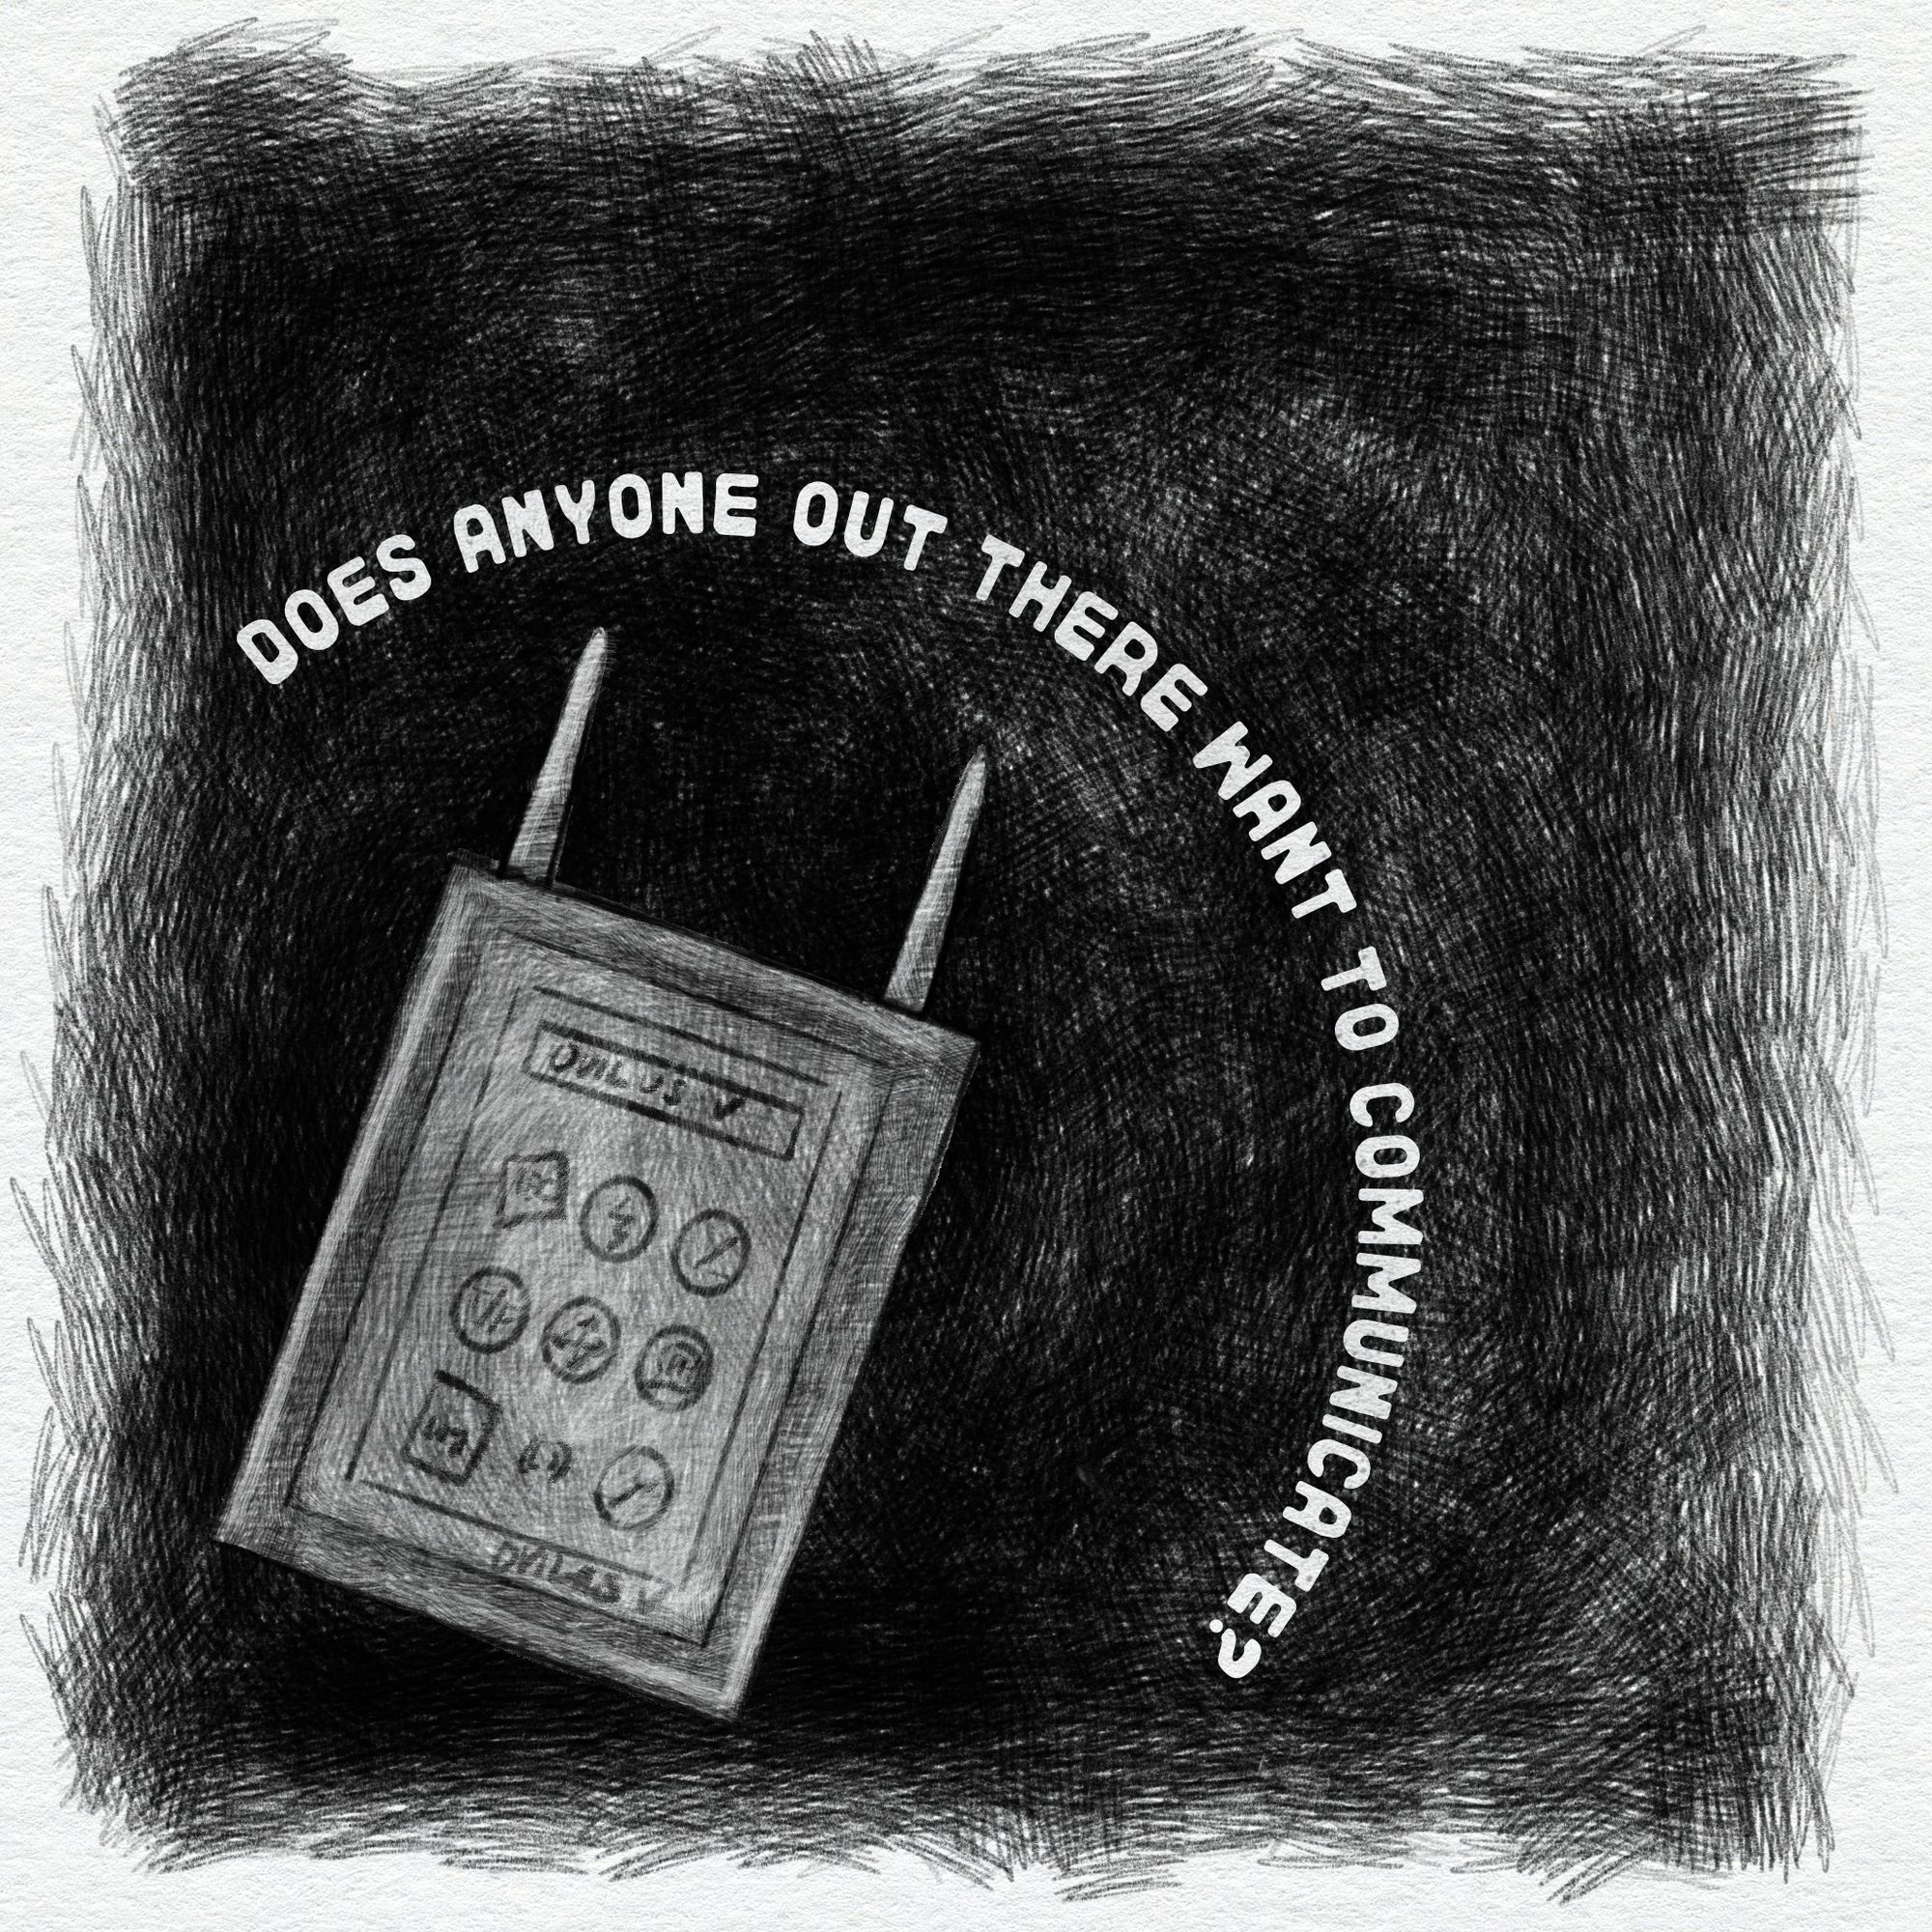 a graphite-style digital sketch of an ovilus with the words "does anyone out there want to communicate?"